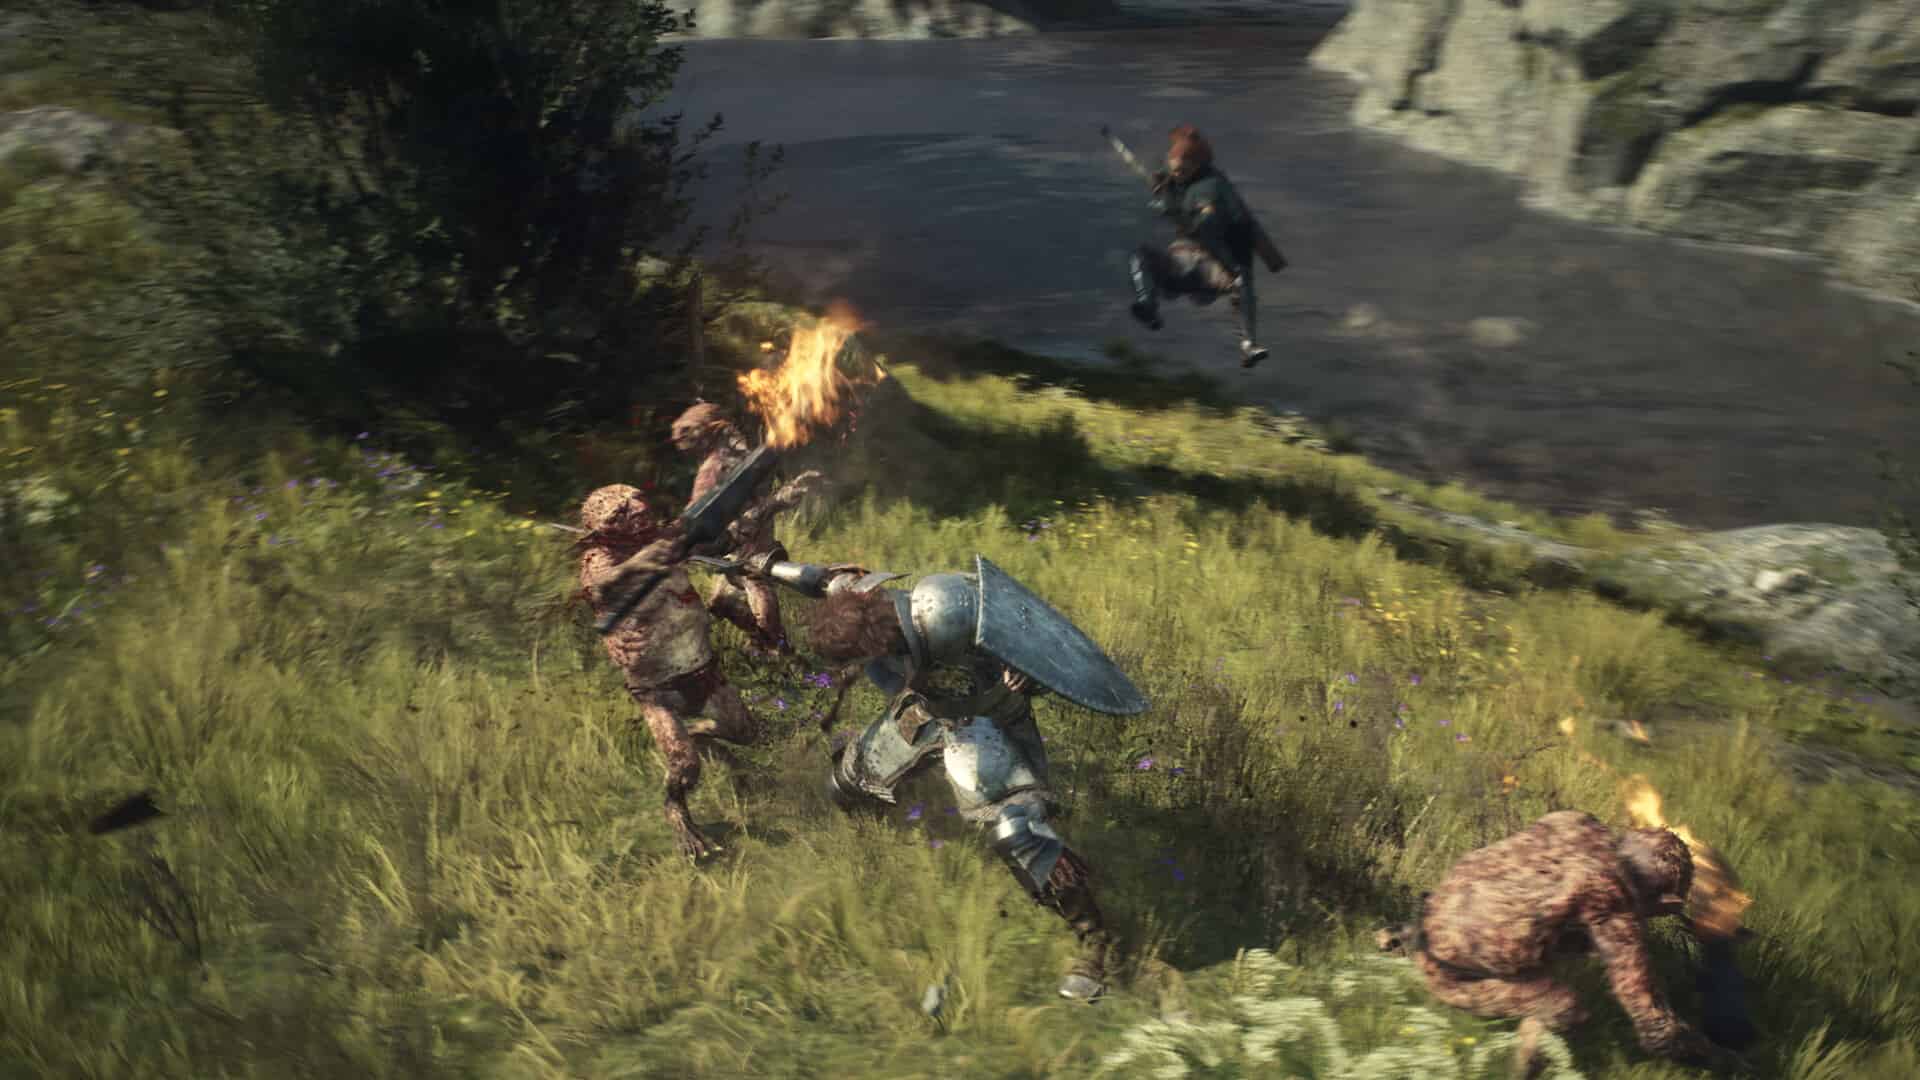 Dragon's Dogma 2 Lost Save Progress Issue: Is there any fix yet